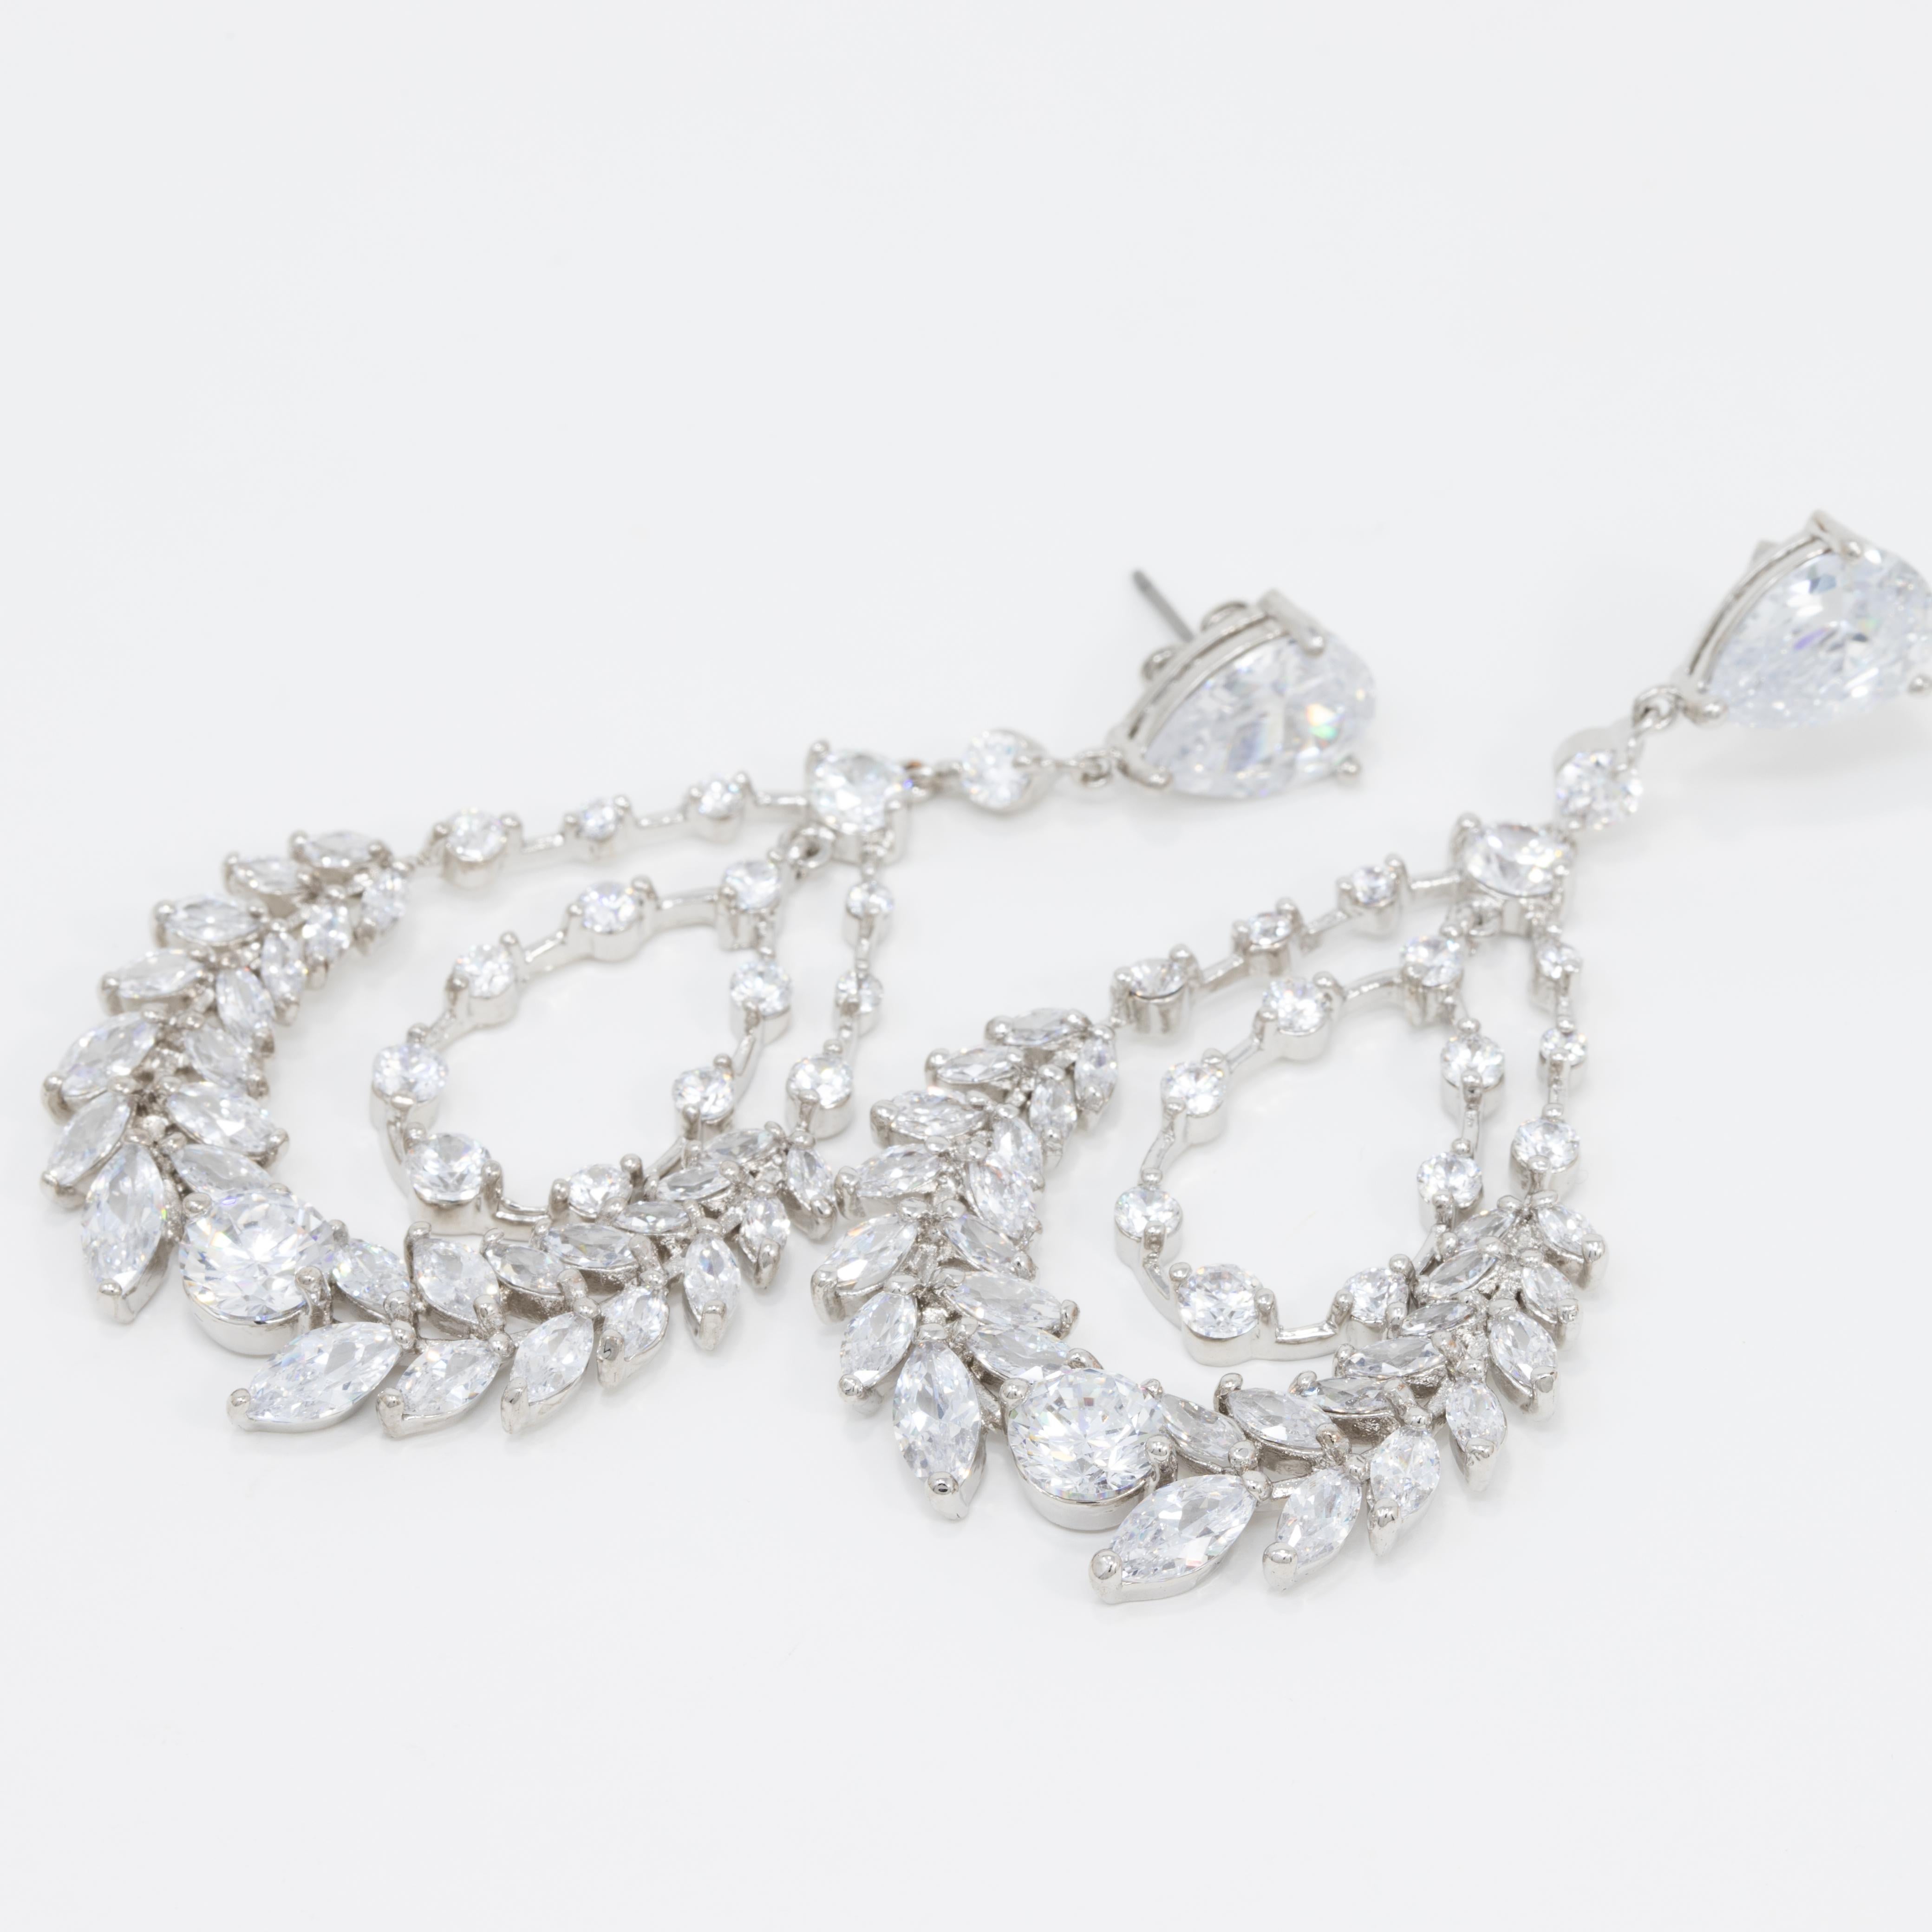 Marquise and round clear cubic zirconia crystals create this dazzling drop design worthy of a red carpet event. Dangle earrings by Kenneth Jay Lane.

CZ by Kenneth Jay Lane line.

Rhodium Plated Brass. Post with friction.

Tags, Marks, Hallmarks: